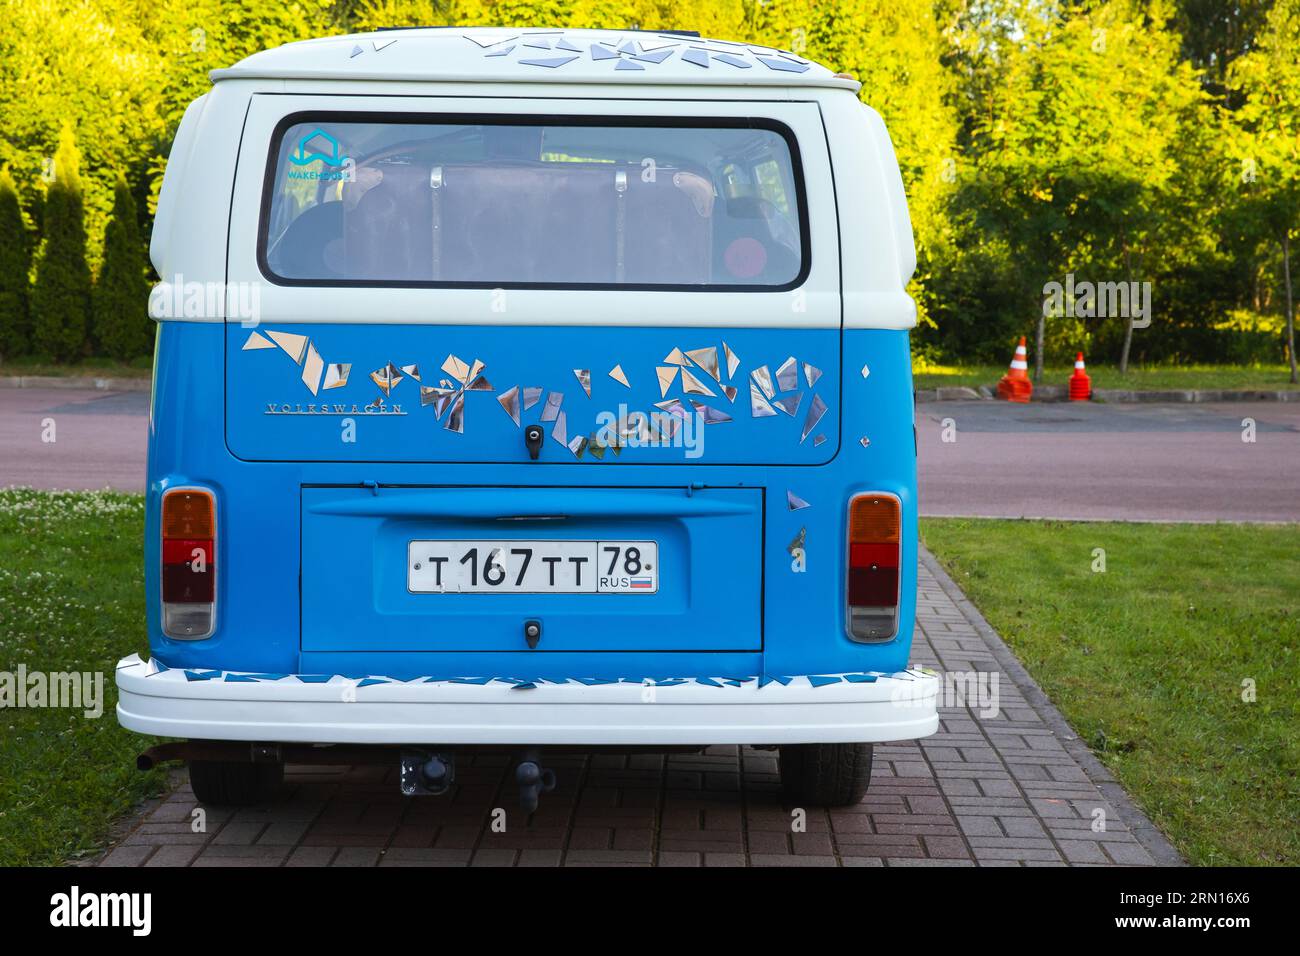 St-Petersburg, Russia - July 1, 2021: Blue white Volkswagen Transporter T2 bus stands parked on a cobbled lane, rear view Stock Photo